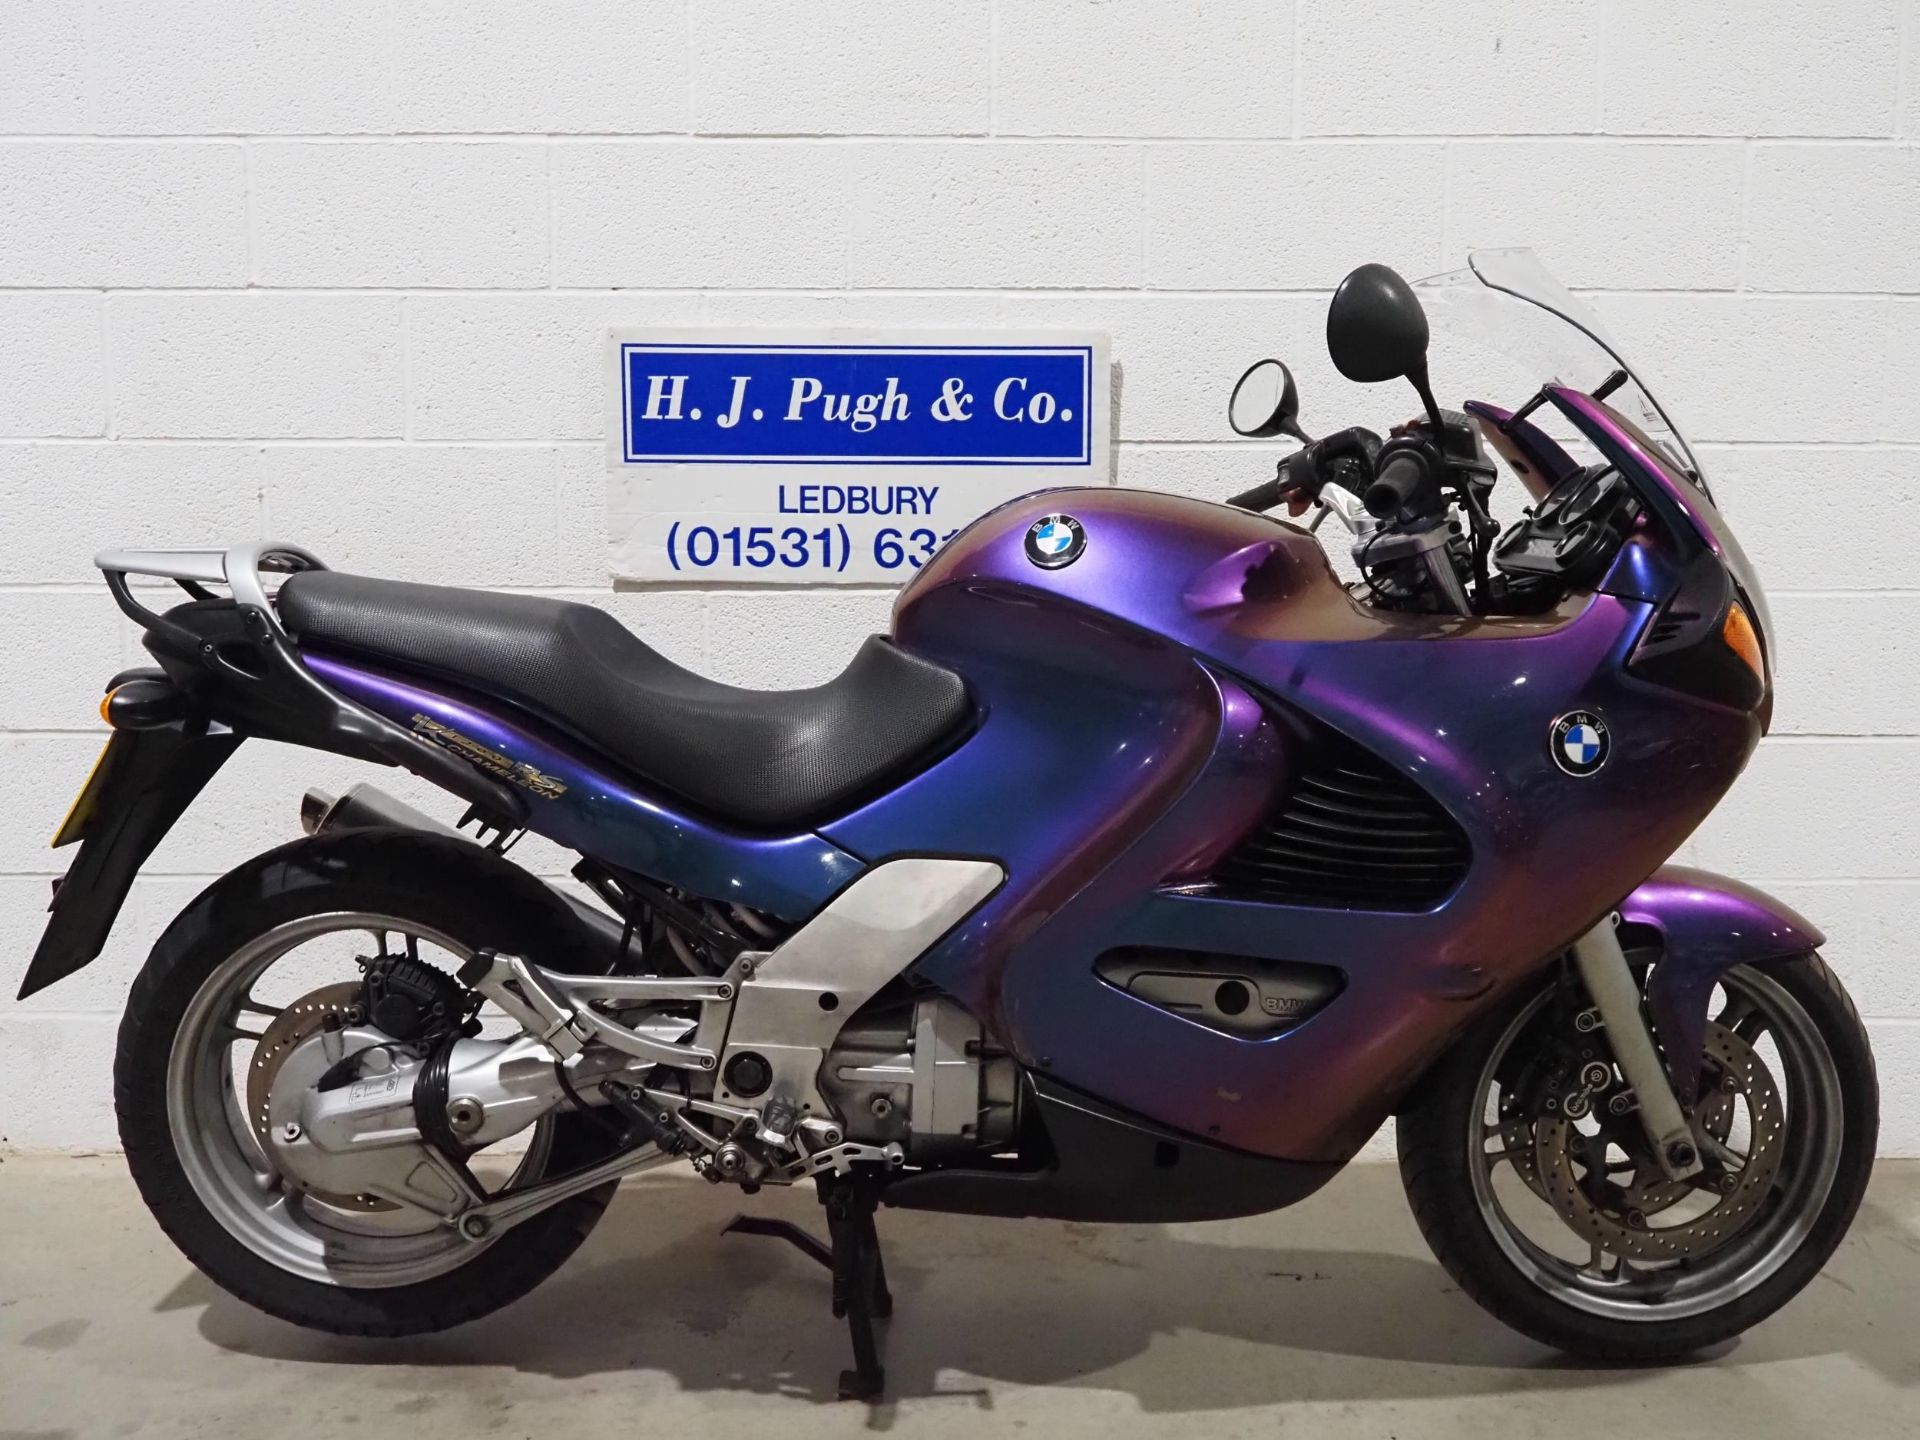 BMW K1200 RS motorcycle. 1997. 1171cc. Runs and rides, MOT until 18.03.25. Comes with heated